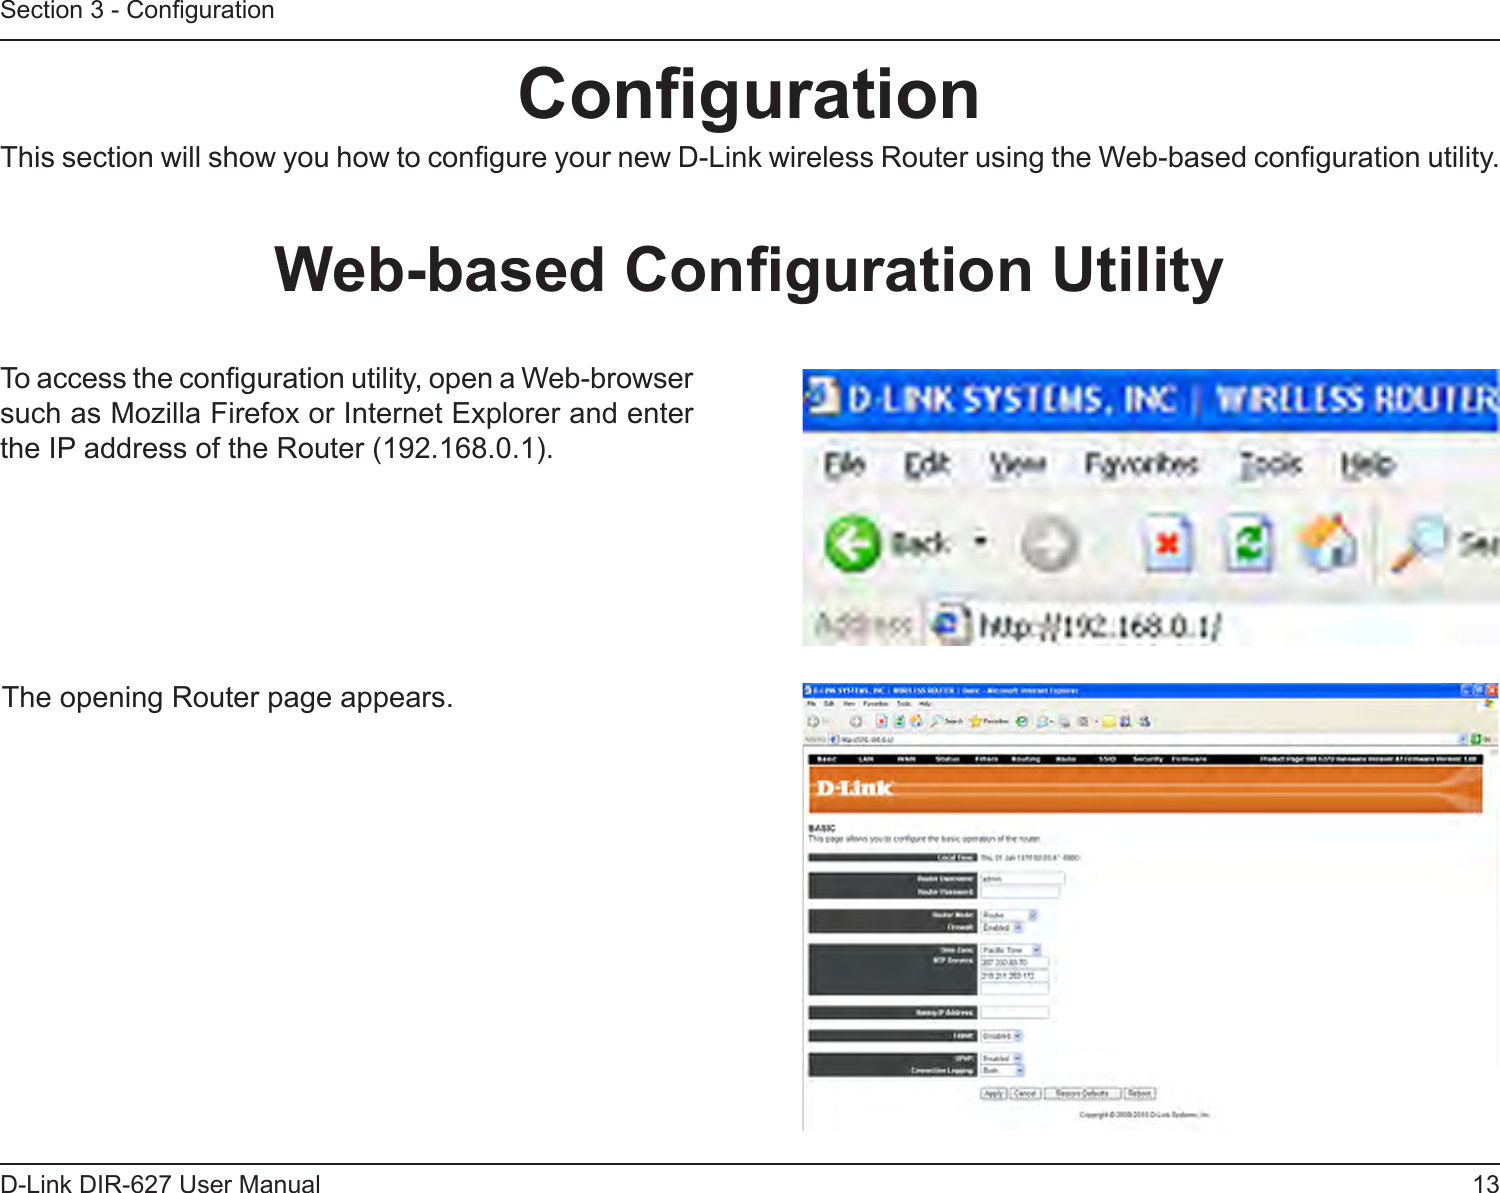 13D-Link DIR-627 User ManualSection 3 - CongurationCongurationThis section will show you how to congure your new D-Link wireless Router using the Web-based conguration utility.Web-basedCongurationUtilityTo access the conguration utility, open a Web-browser such as Mozilla Firefox or Internet Explorer and enter the IP address of the Router (192.168.0.1).The opening Router page appears.